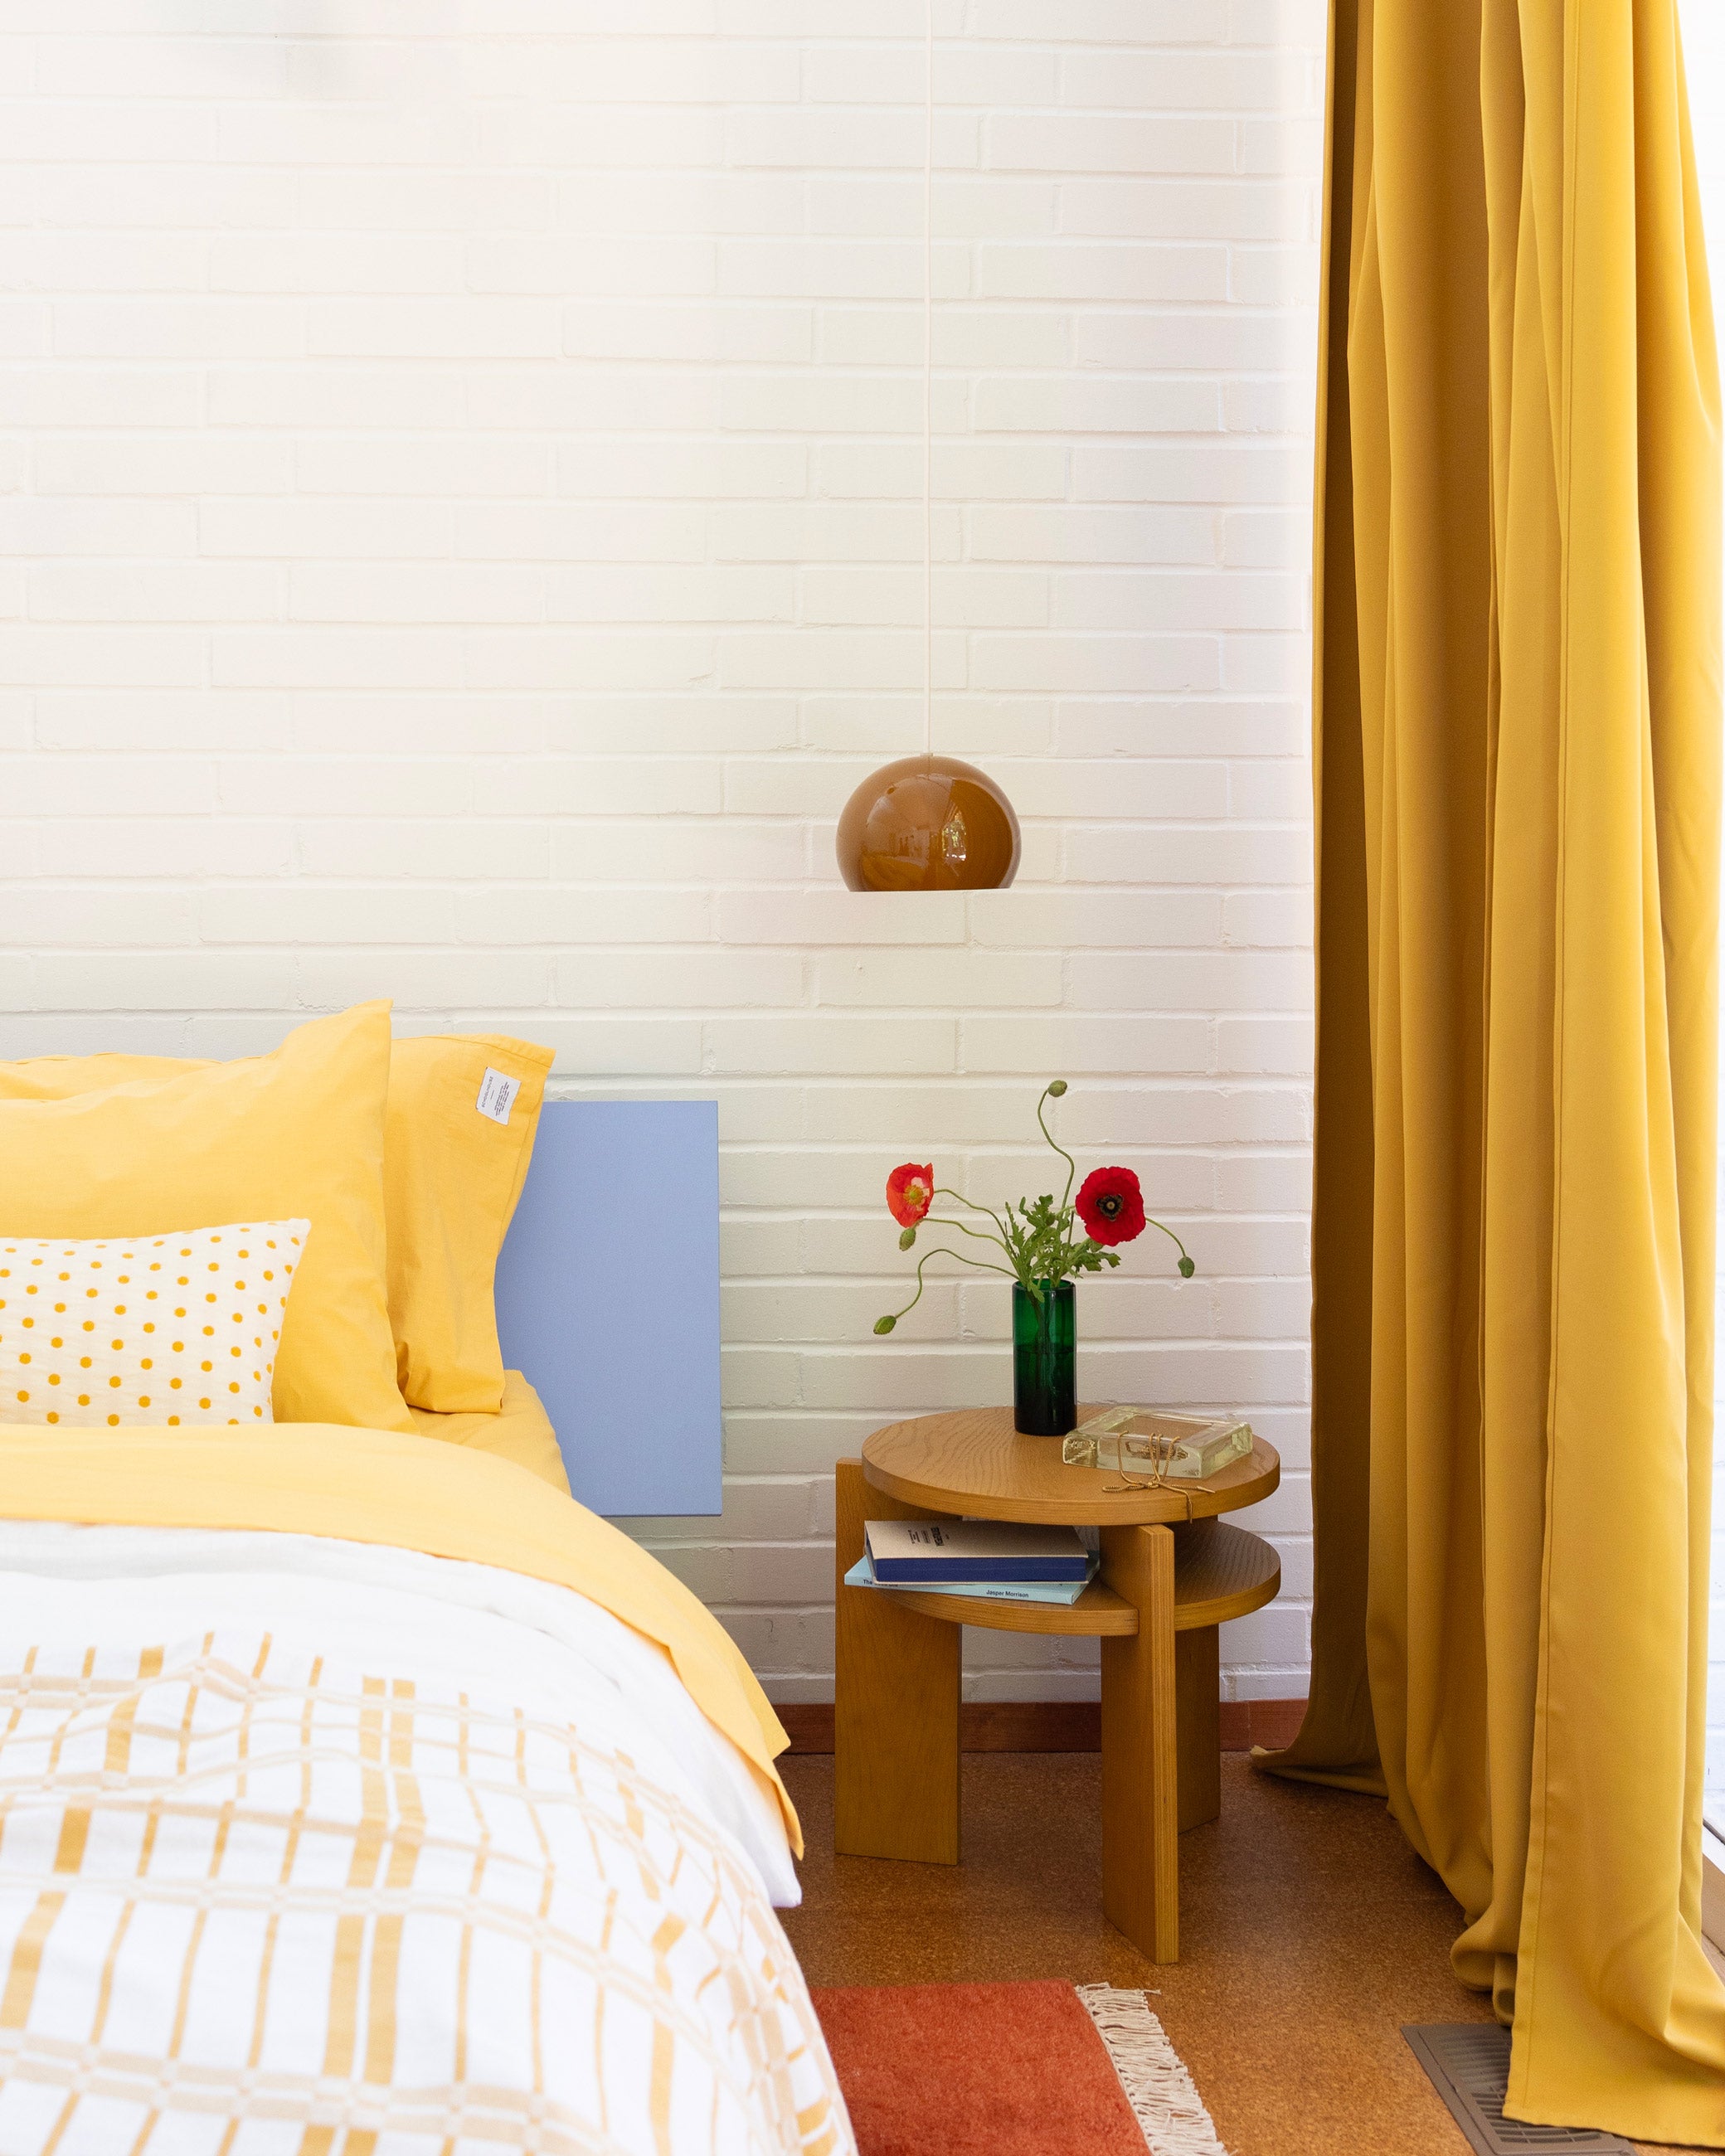 Bedroom with yellow and brown accents.